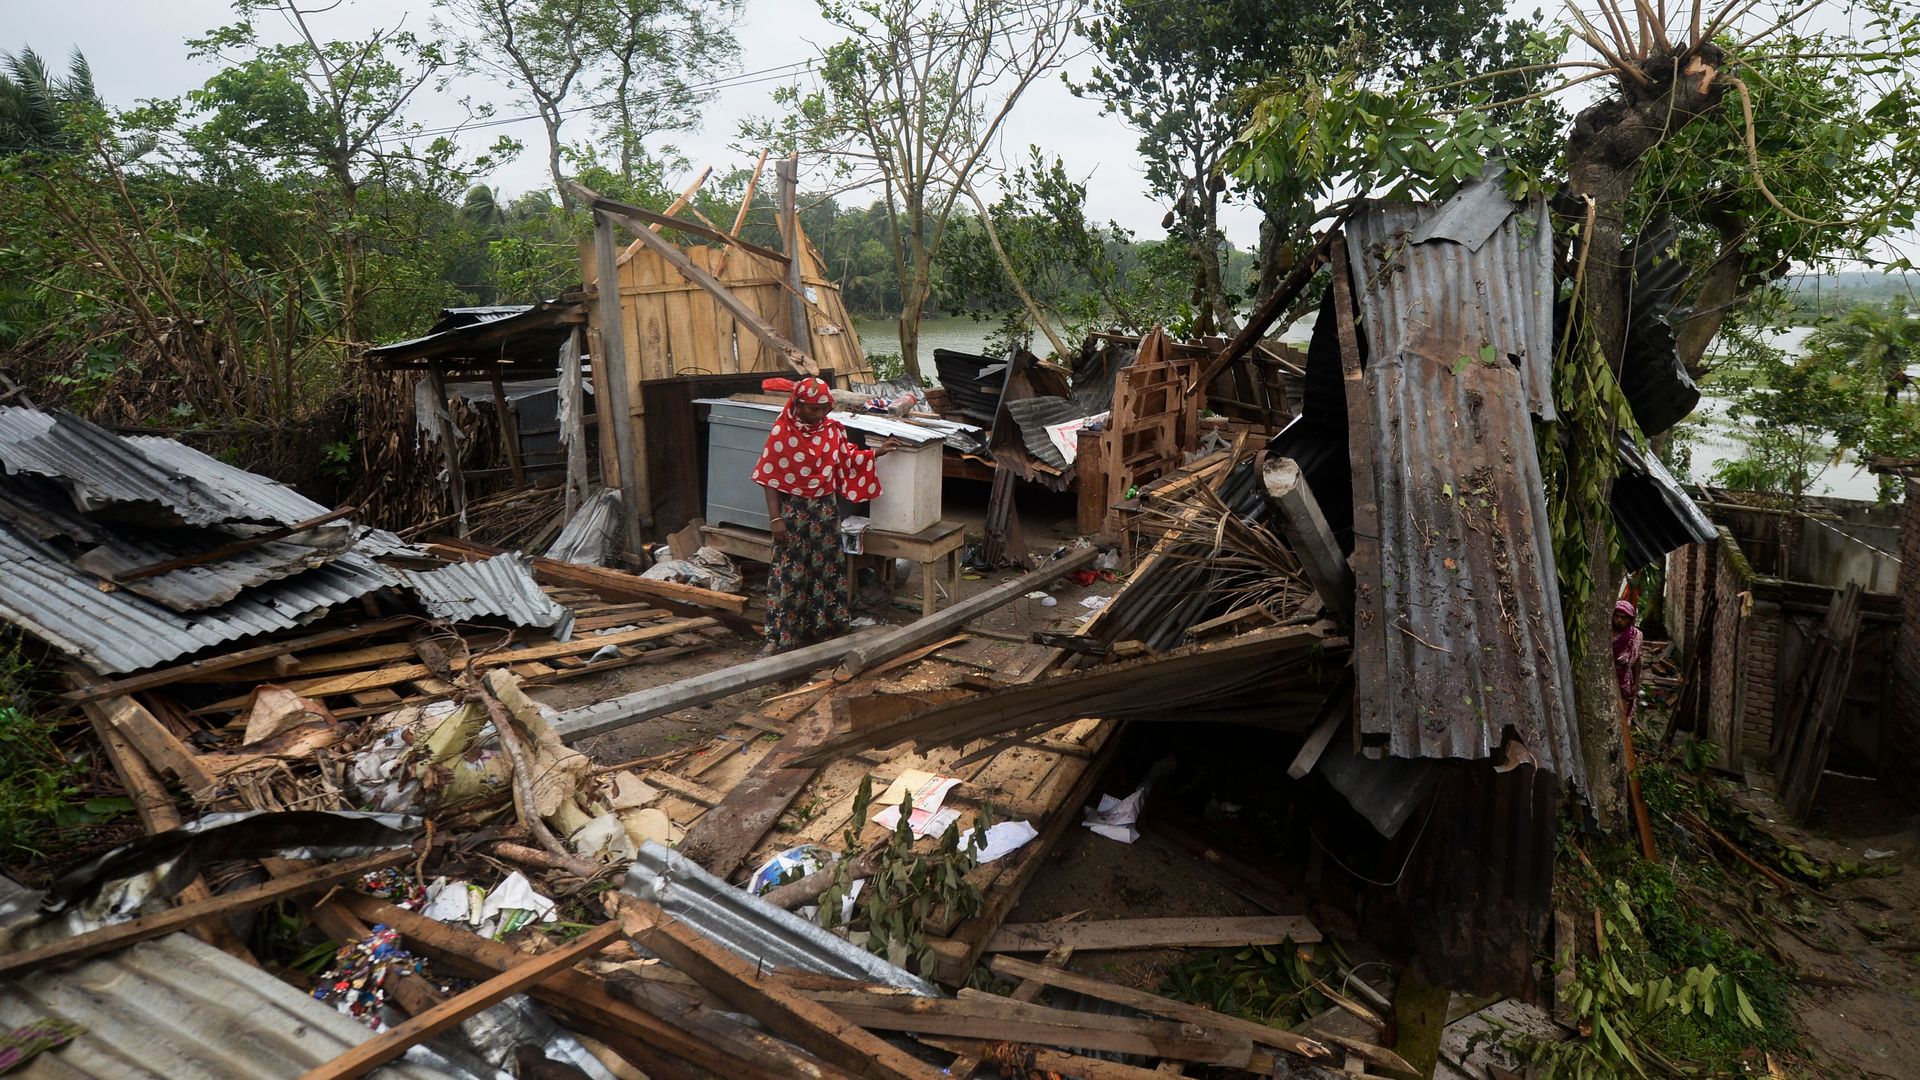  A woman stands amidst the debris of her house damaged by cyclone Amphan in Satkhira on May 21